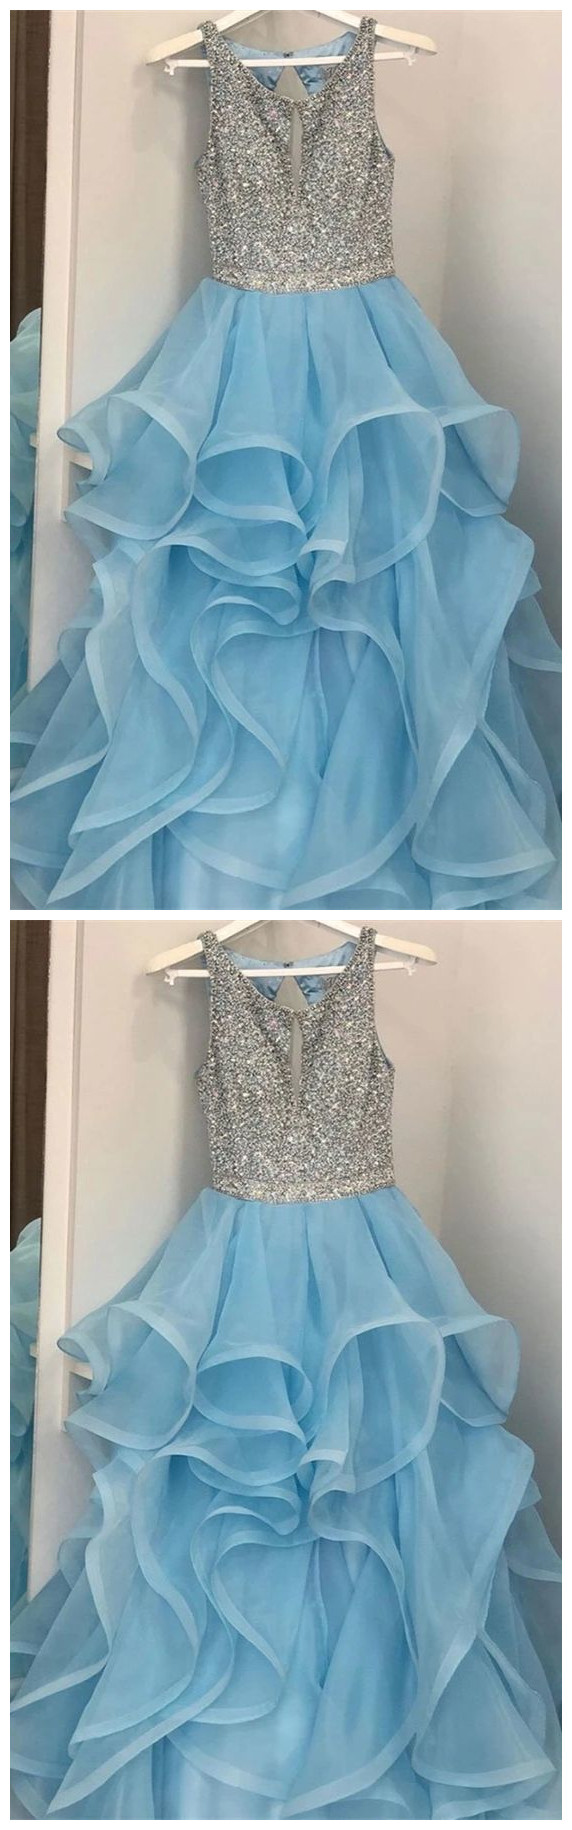 Spark Queen blue prom dresses, ruffled blue prom dresses, long blue prom dresses, aline blue prom dresses, glitter blue prom dress